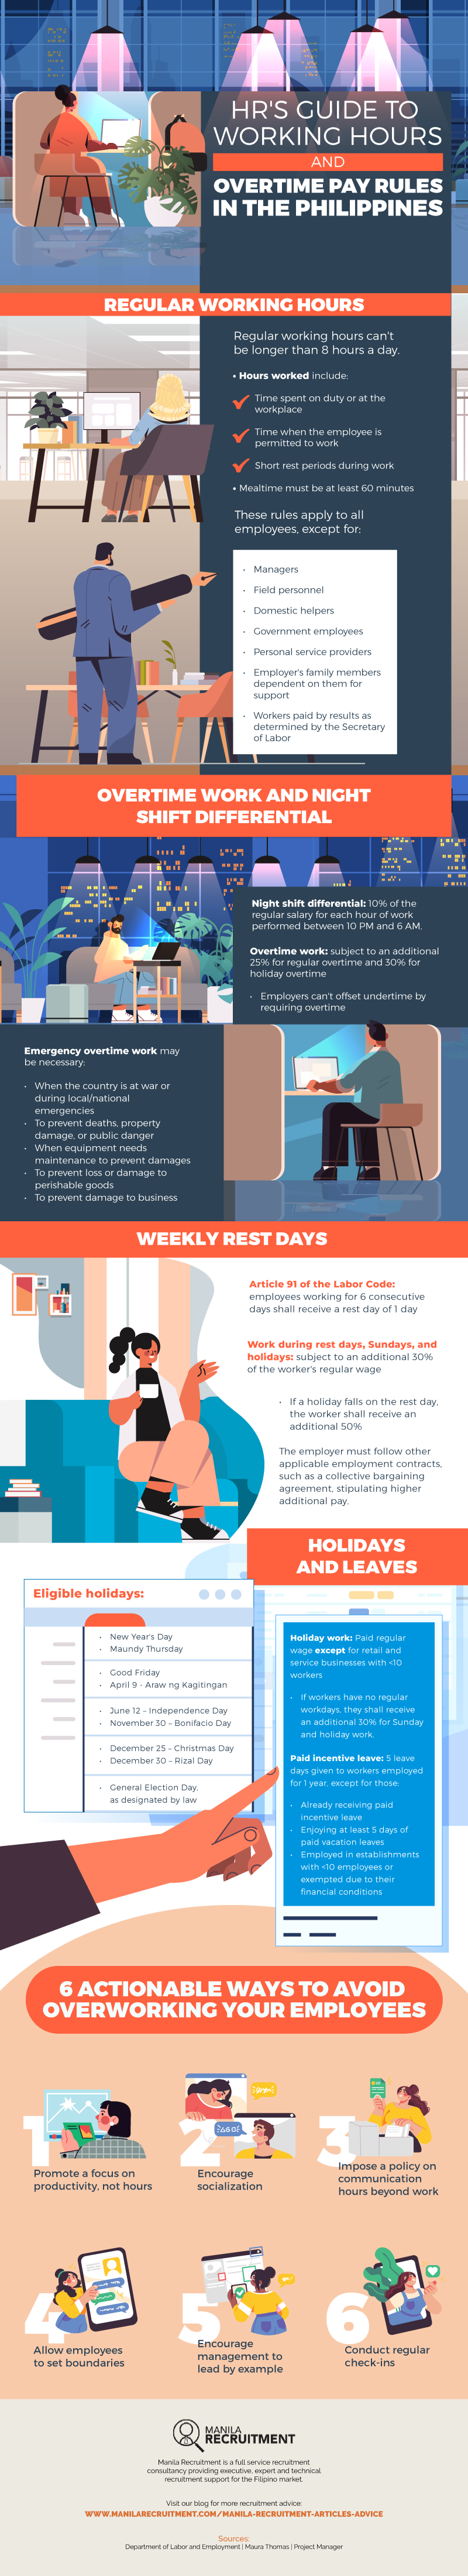 Understanding working hours and overtime pay rules can be tricky. Here's a quick guide to help you nail them down!